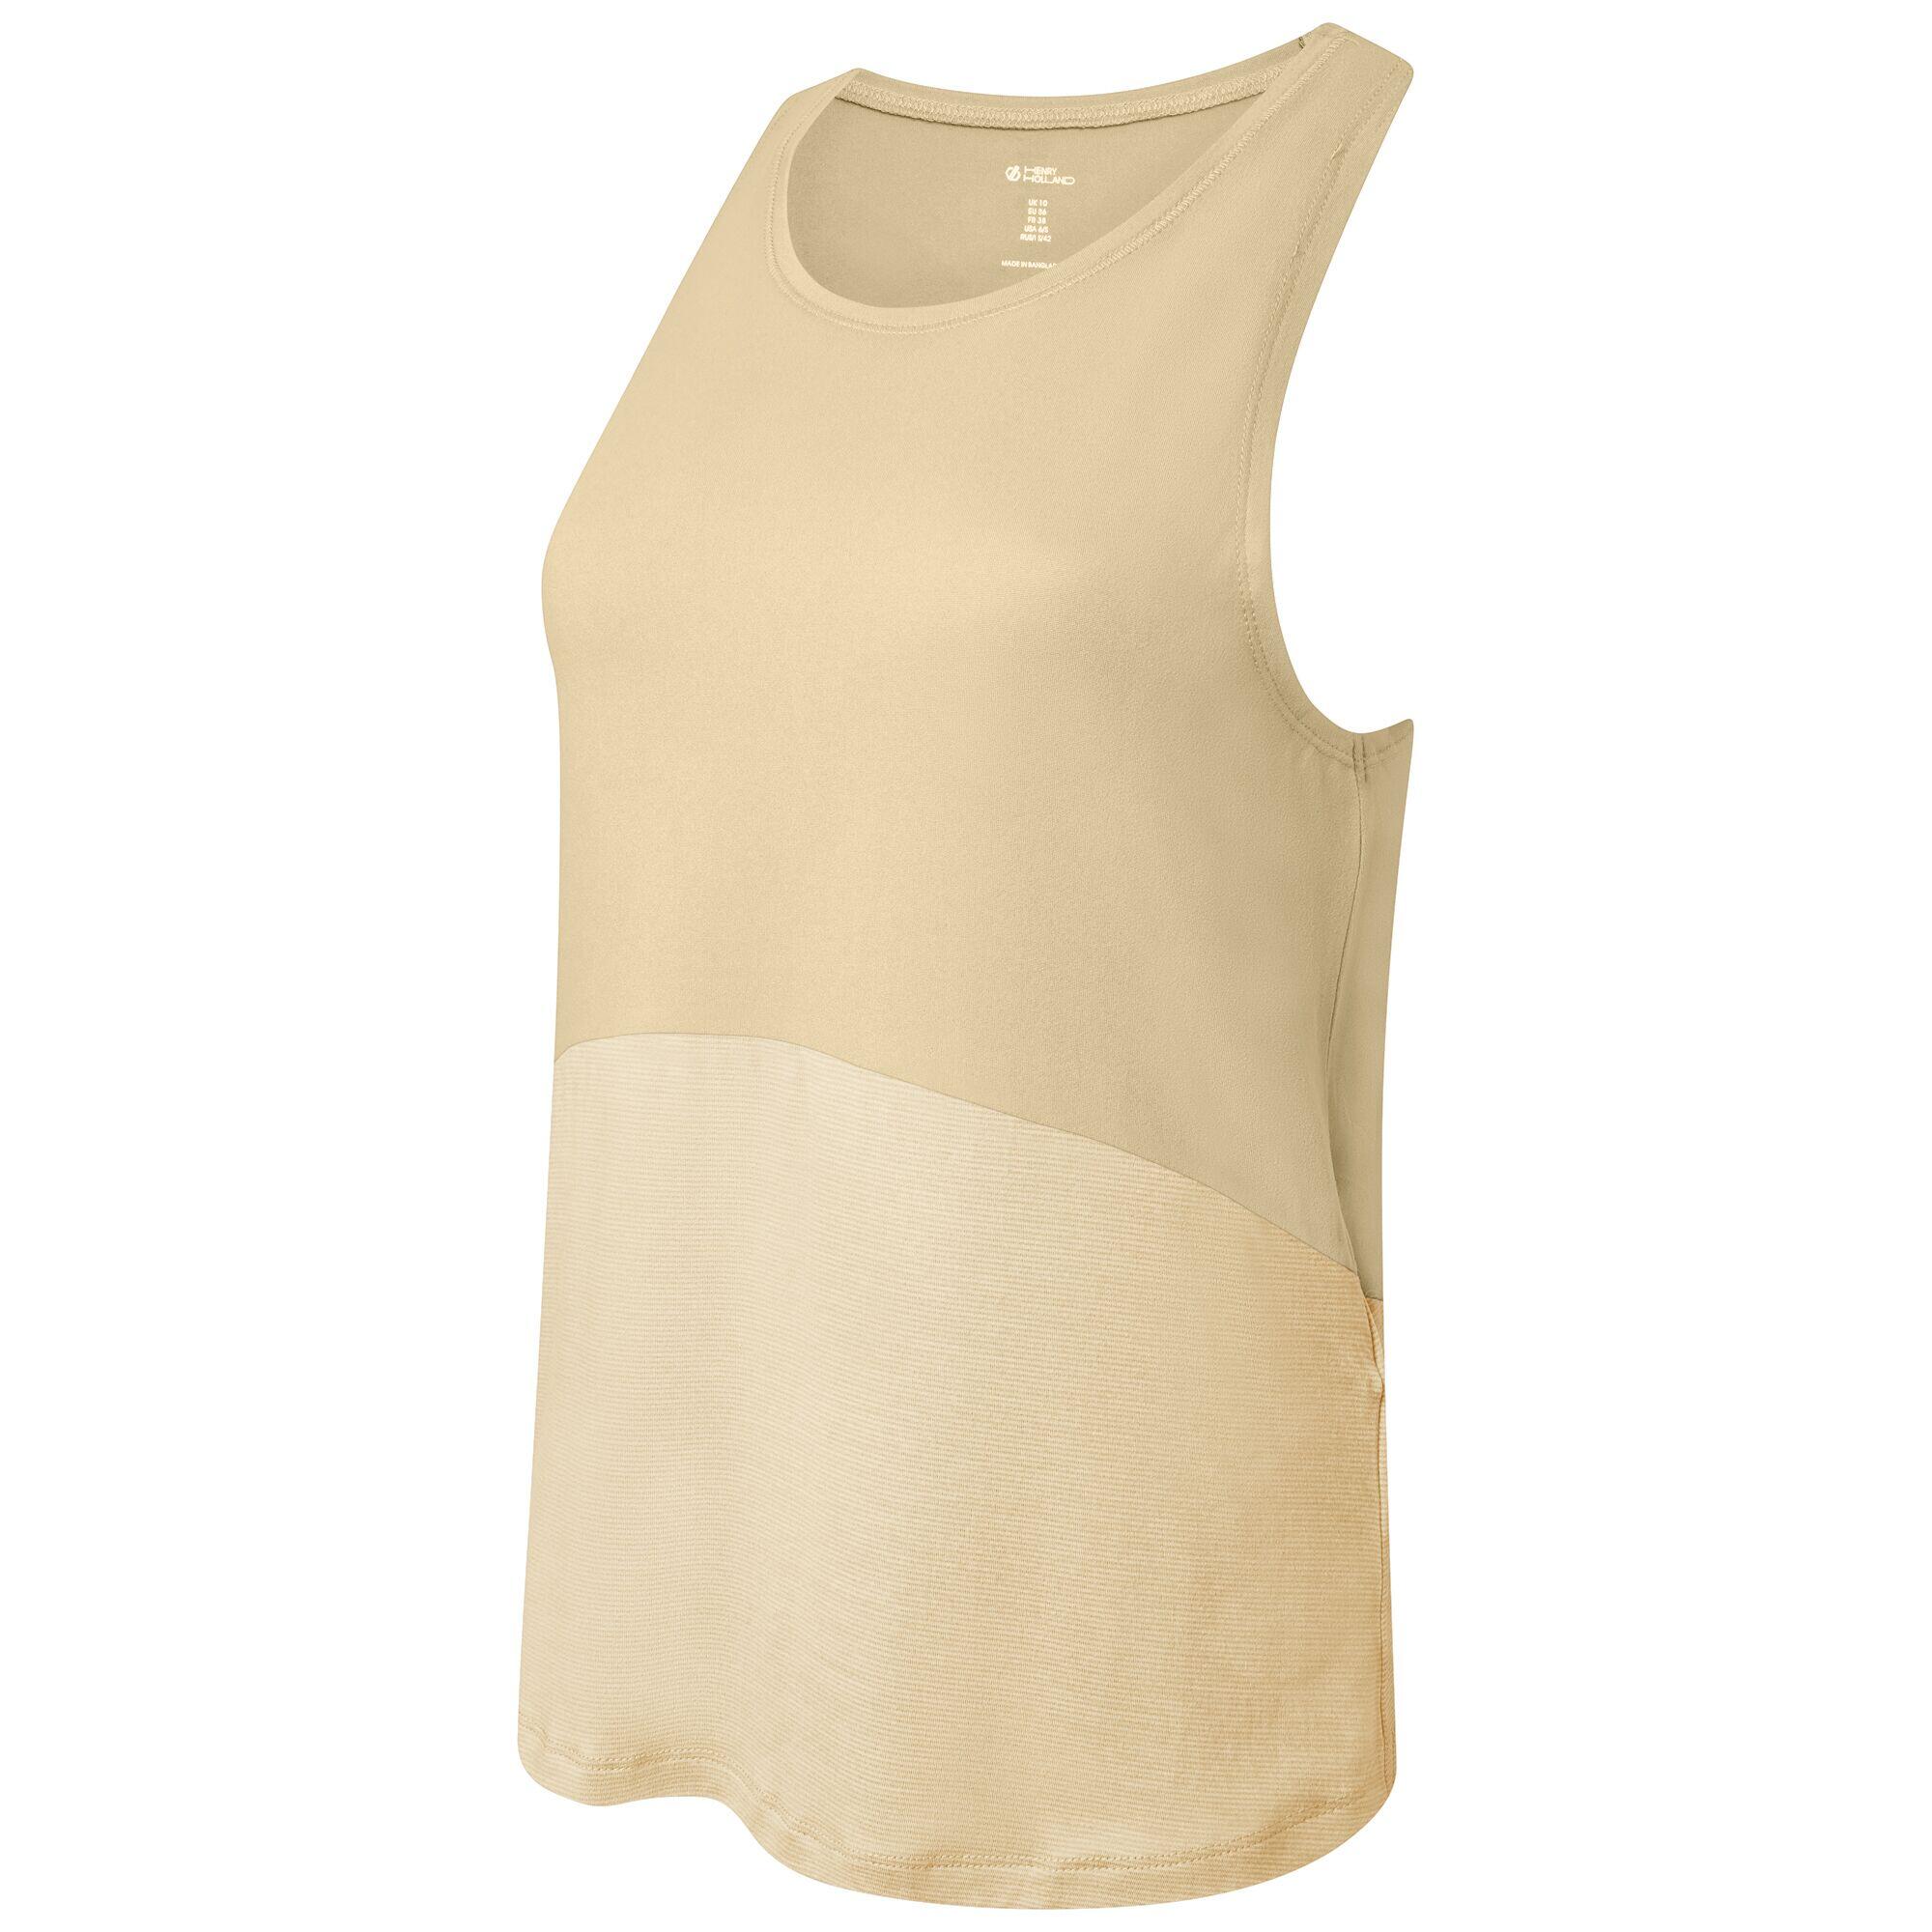 Henry Holland Cut Loose Womens Gym Vest - Green 2/5